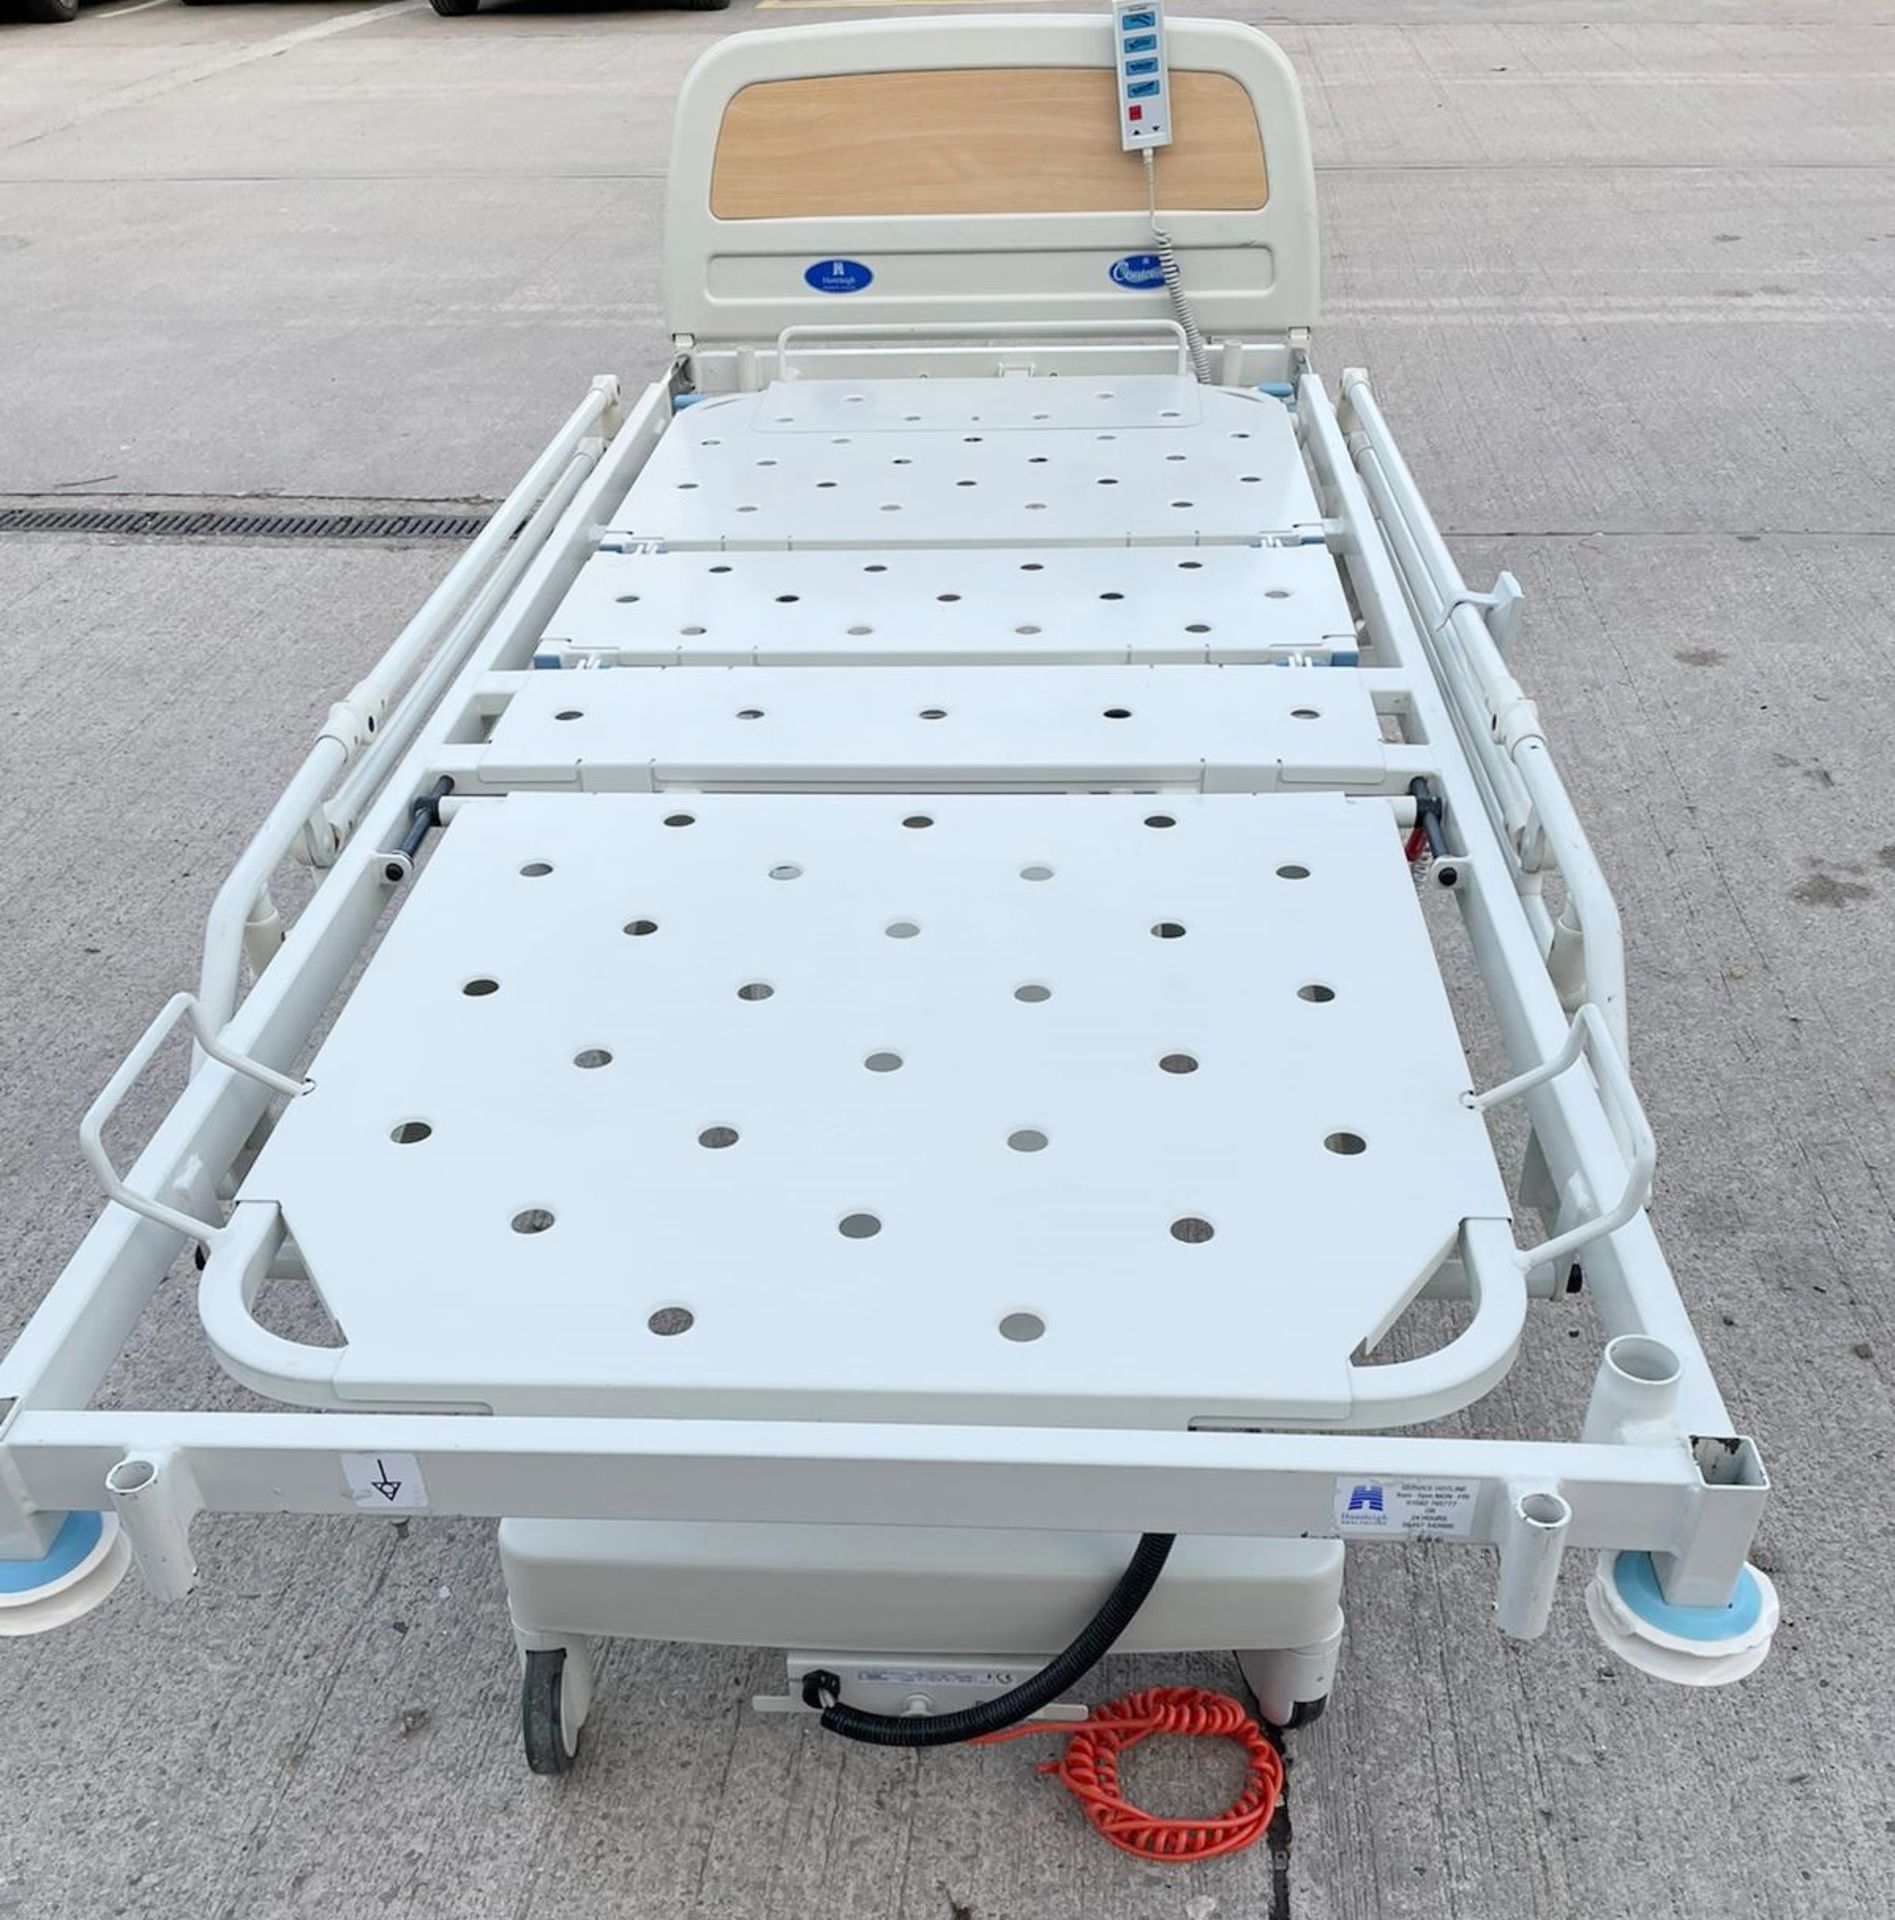 1 x Huntleigh CONTOURA Electric Hospital Bed - Features Rise/Fall 3-Way Profiling, Side Rails, - Image 12 of 13